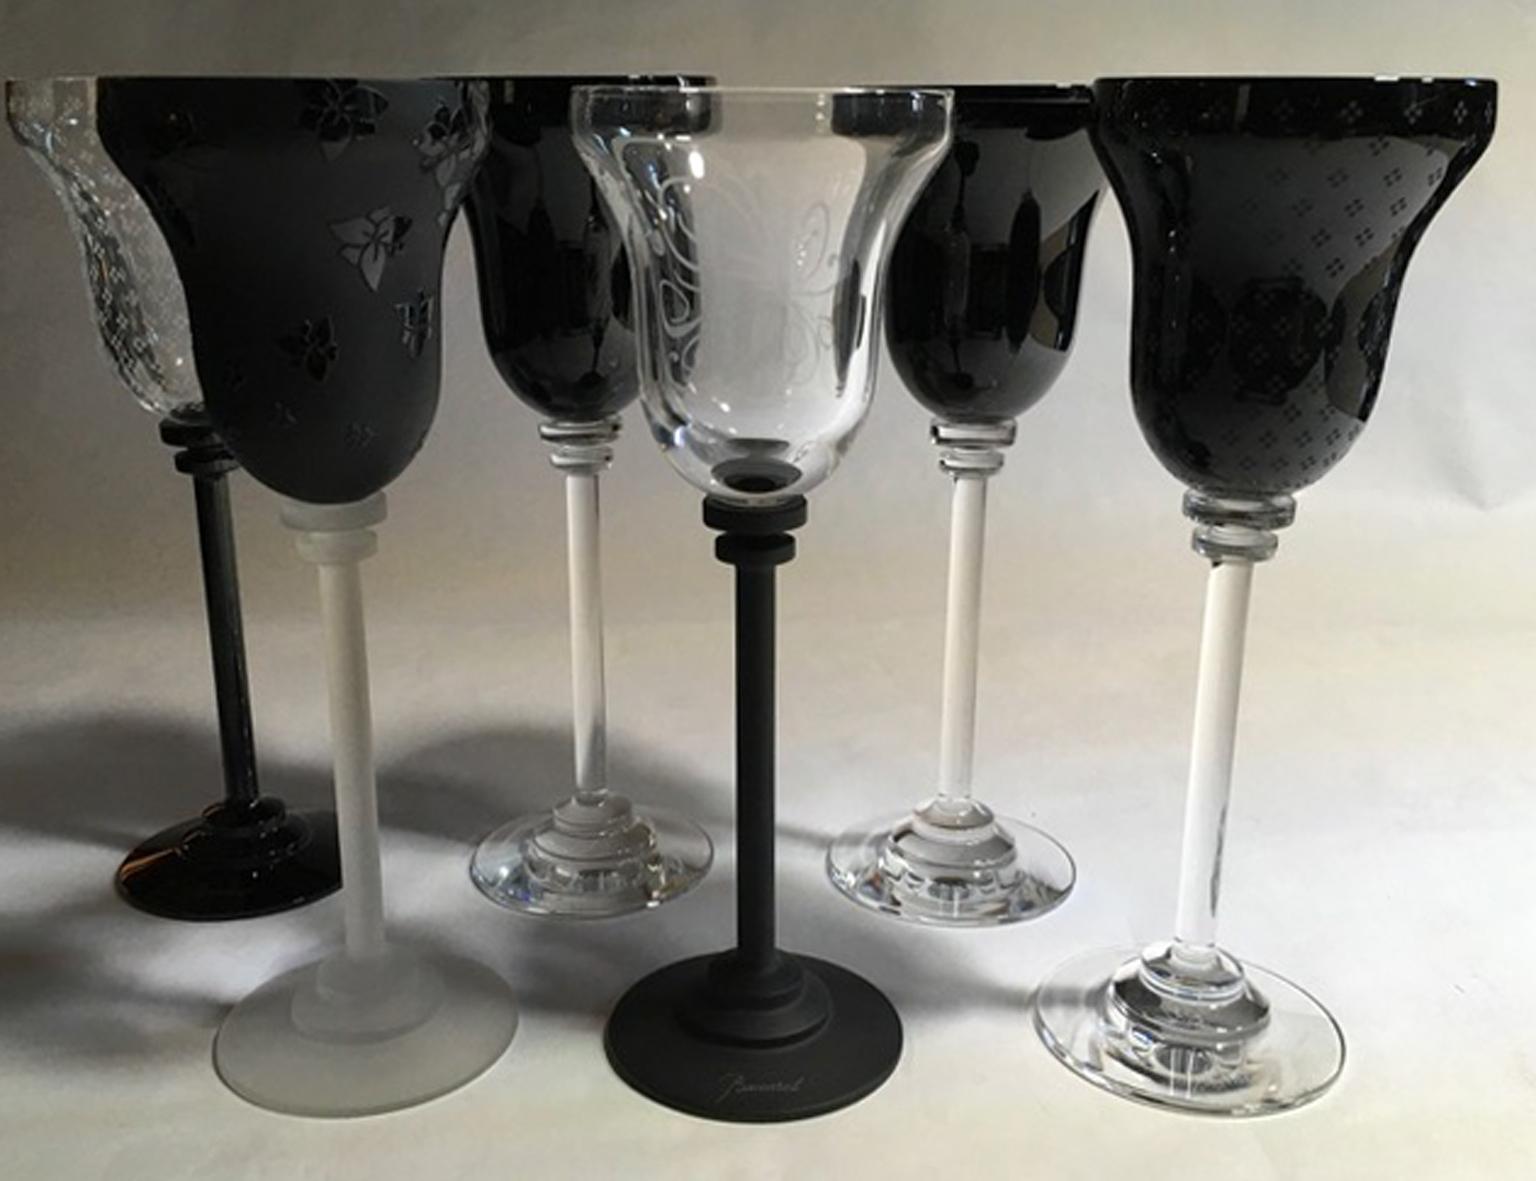 Modern Baccarat Numbered Edition Set of Six Engraved Glasses France, 21st Century